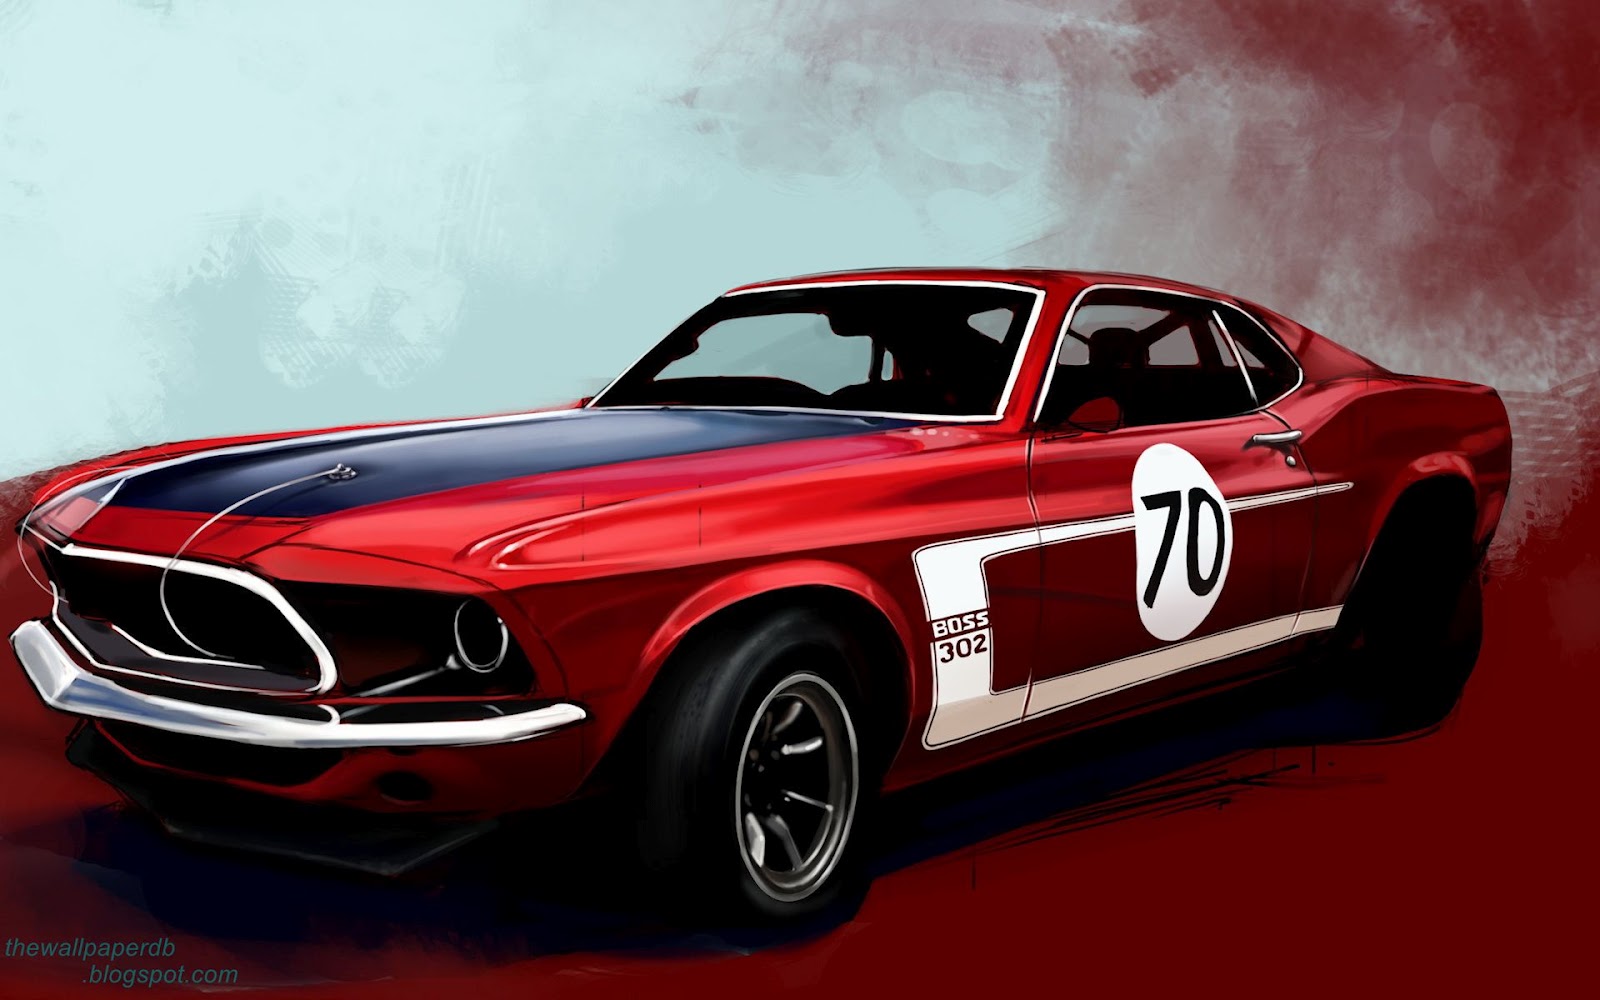 Ford Mustang Turbocharged Wallpaper The Database